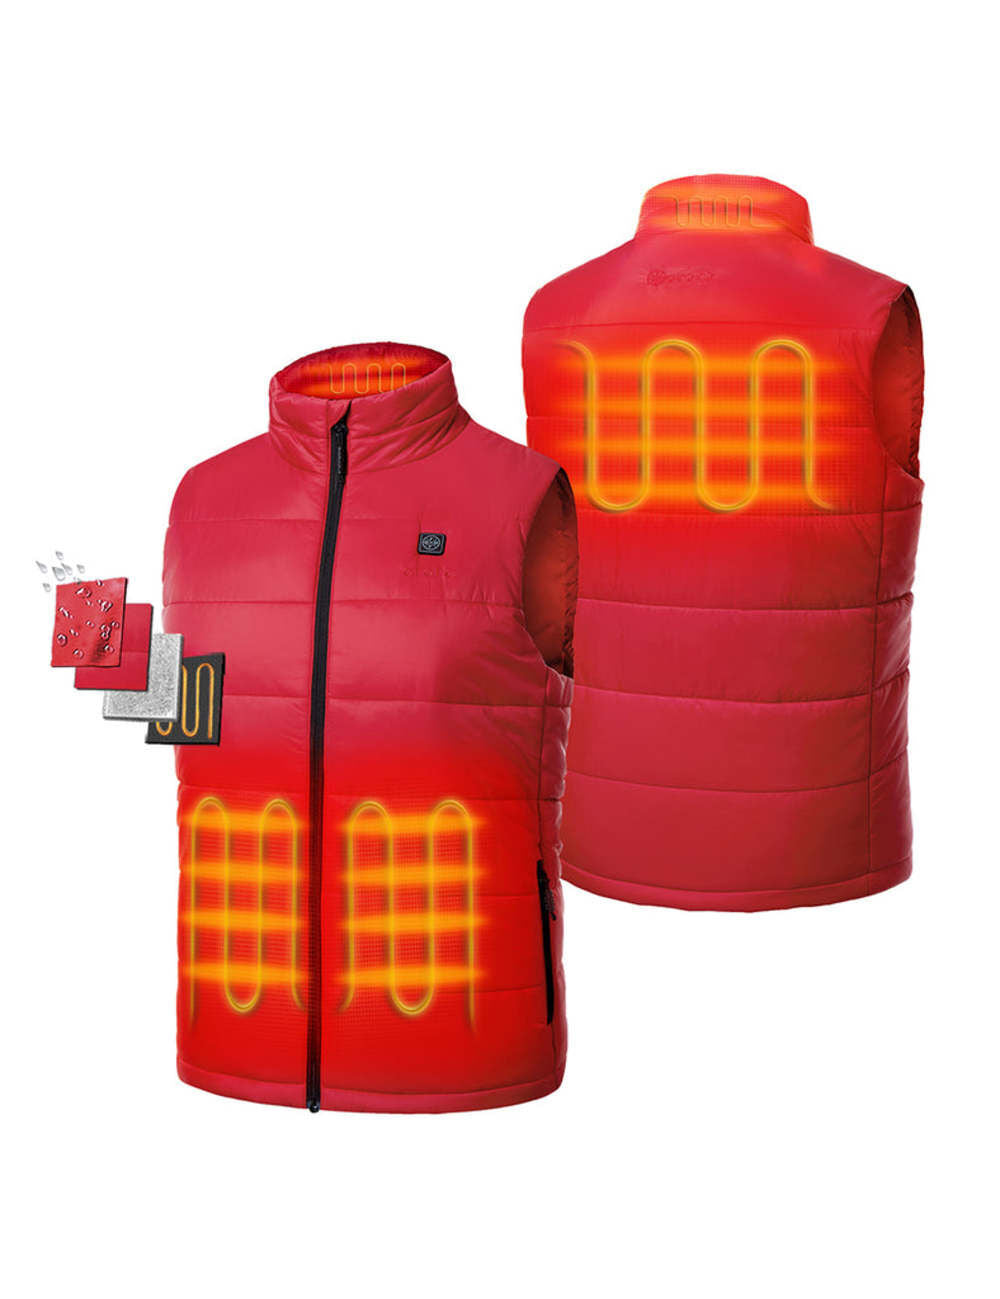 Mens Red Classic Heated Vest Kit Large MVC-41-0805-US